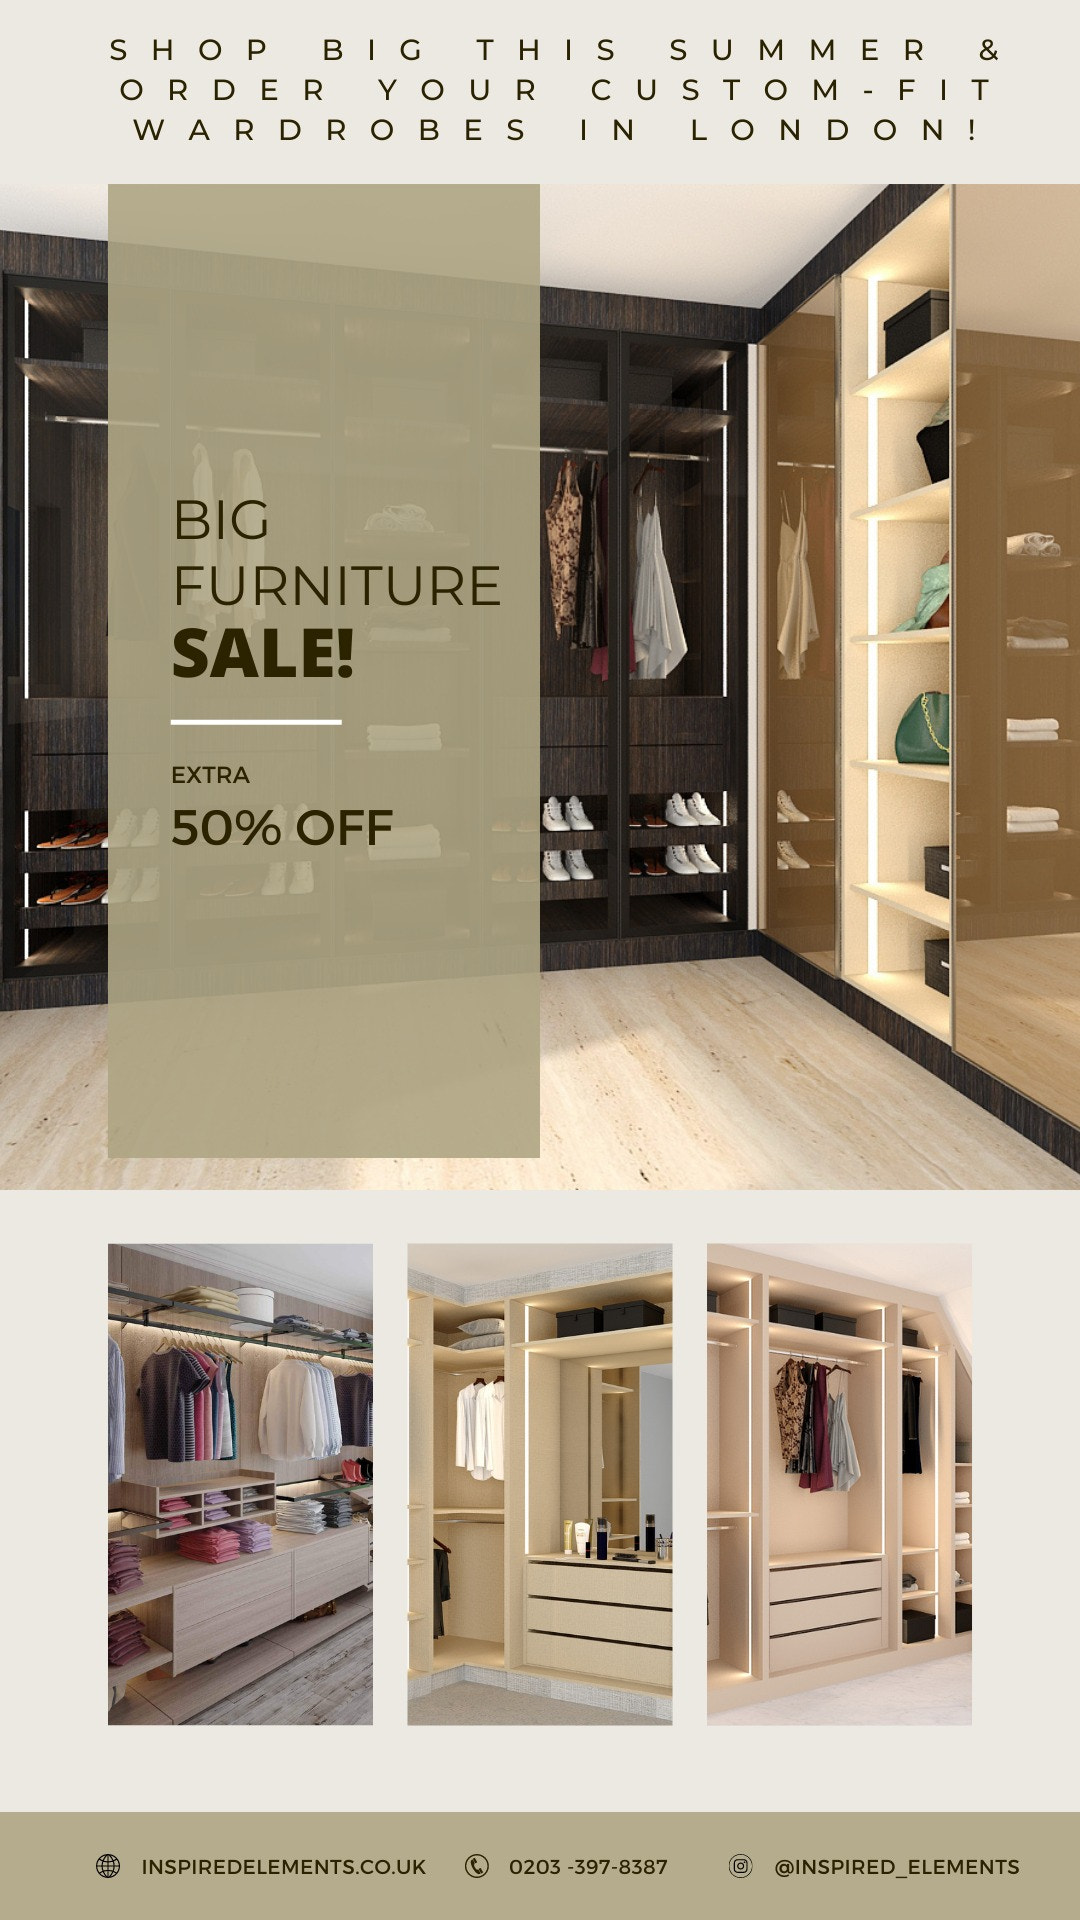 Big Home Furniture Sale in London! Inspired Elements